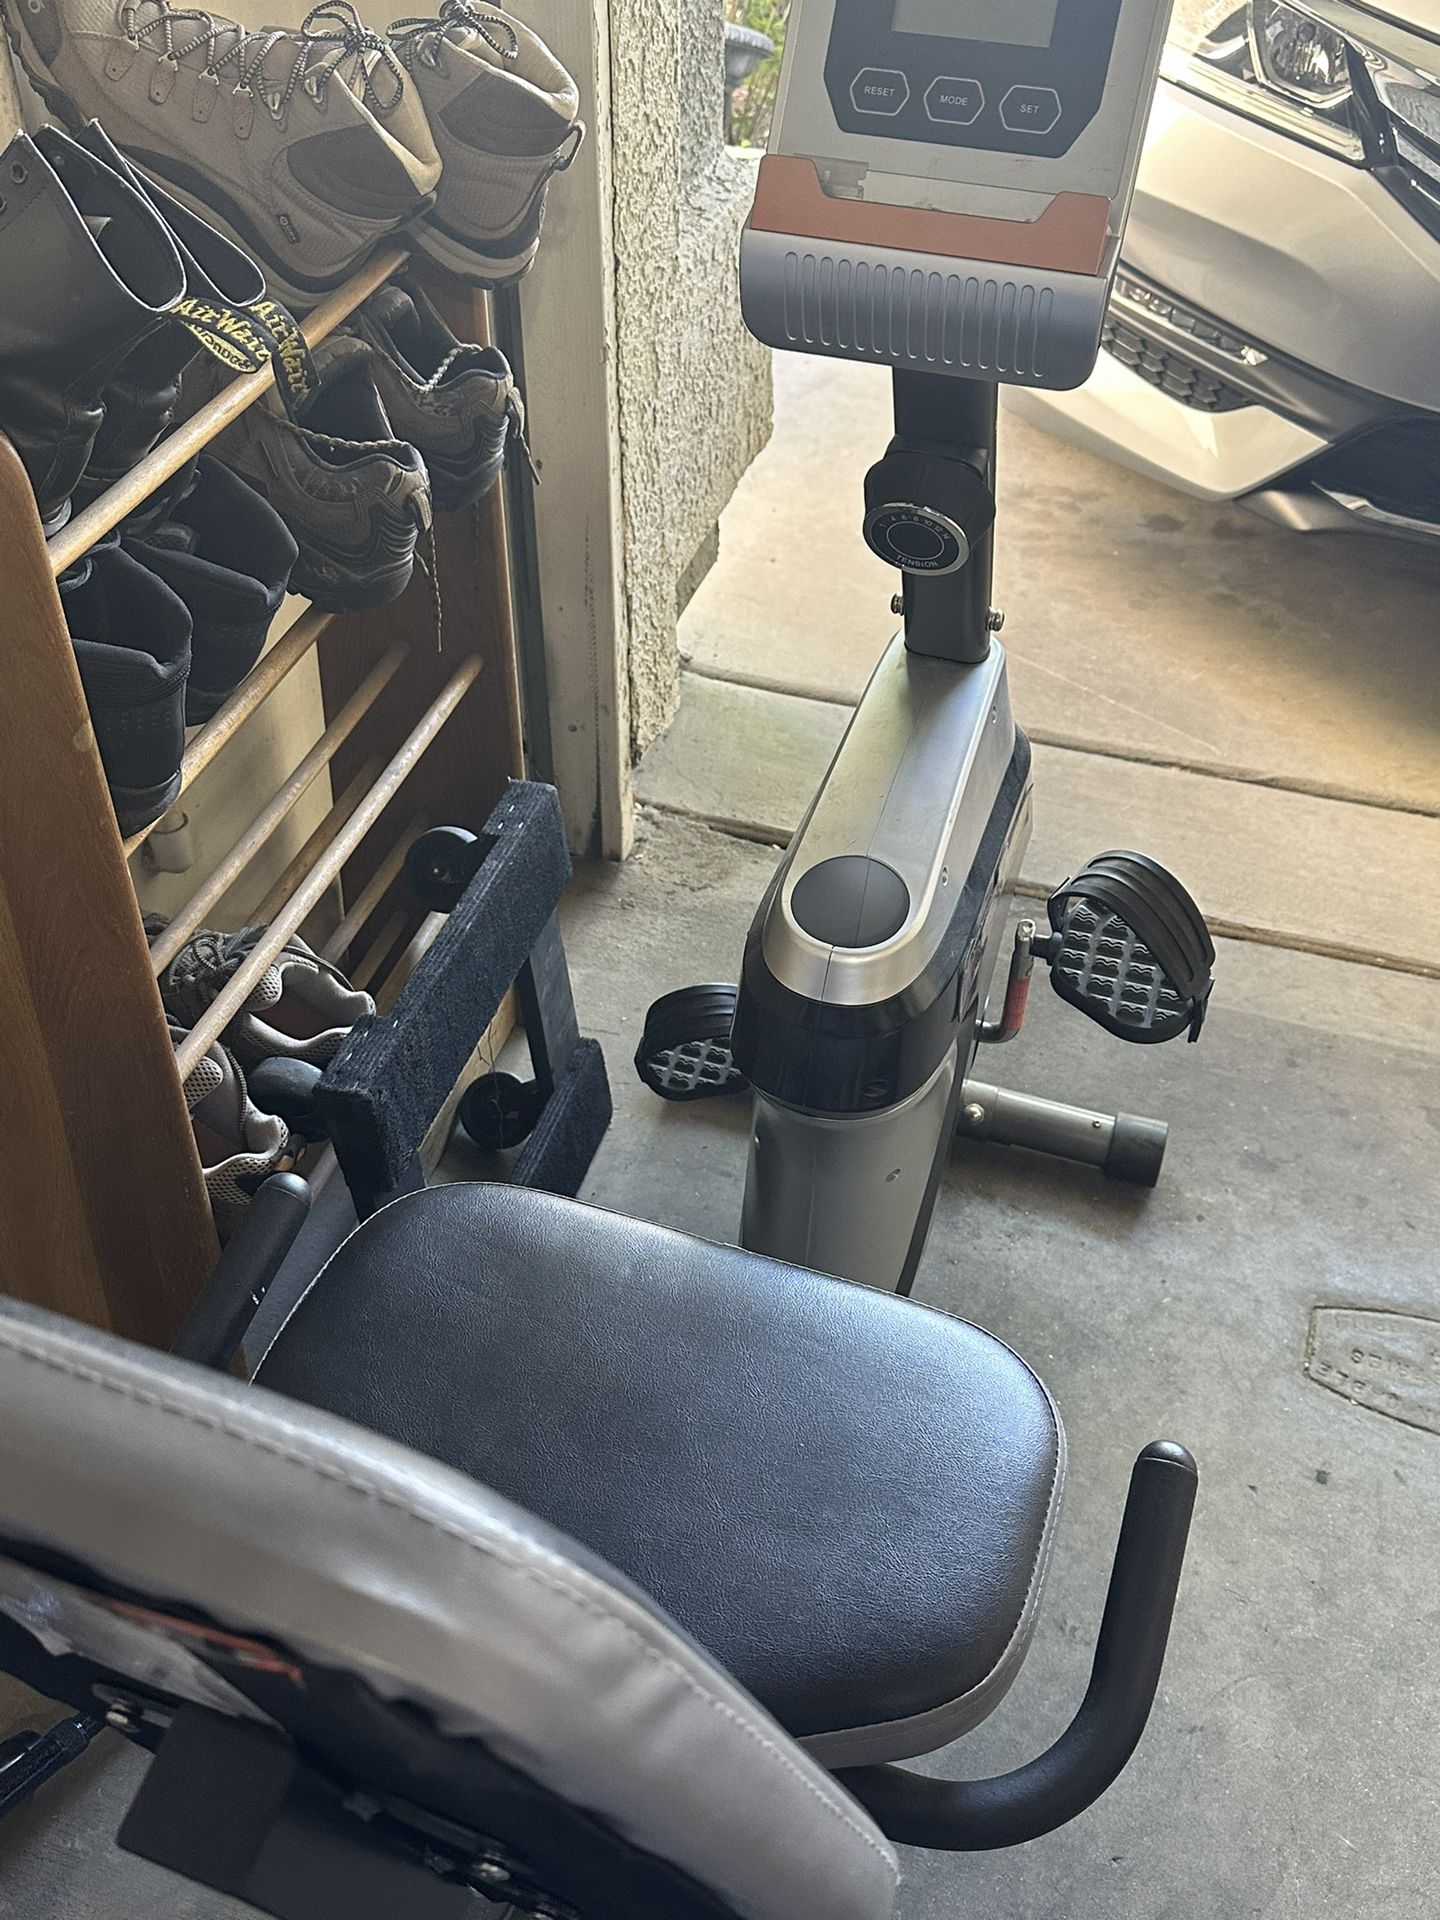 Exercise Bike For Home Workout